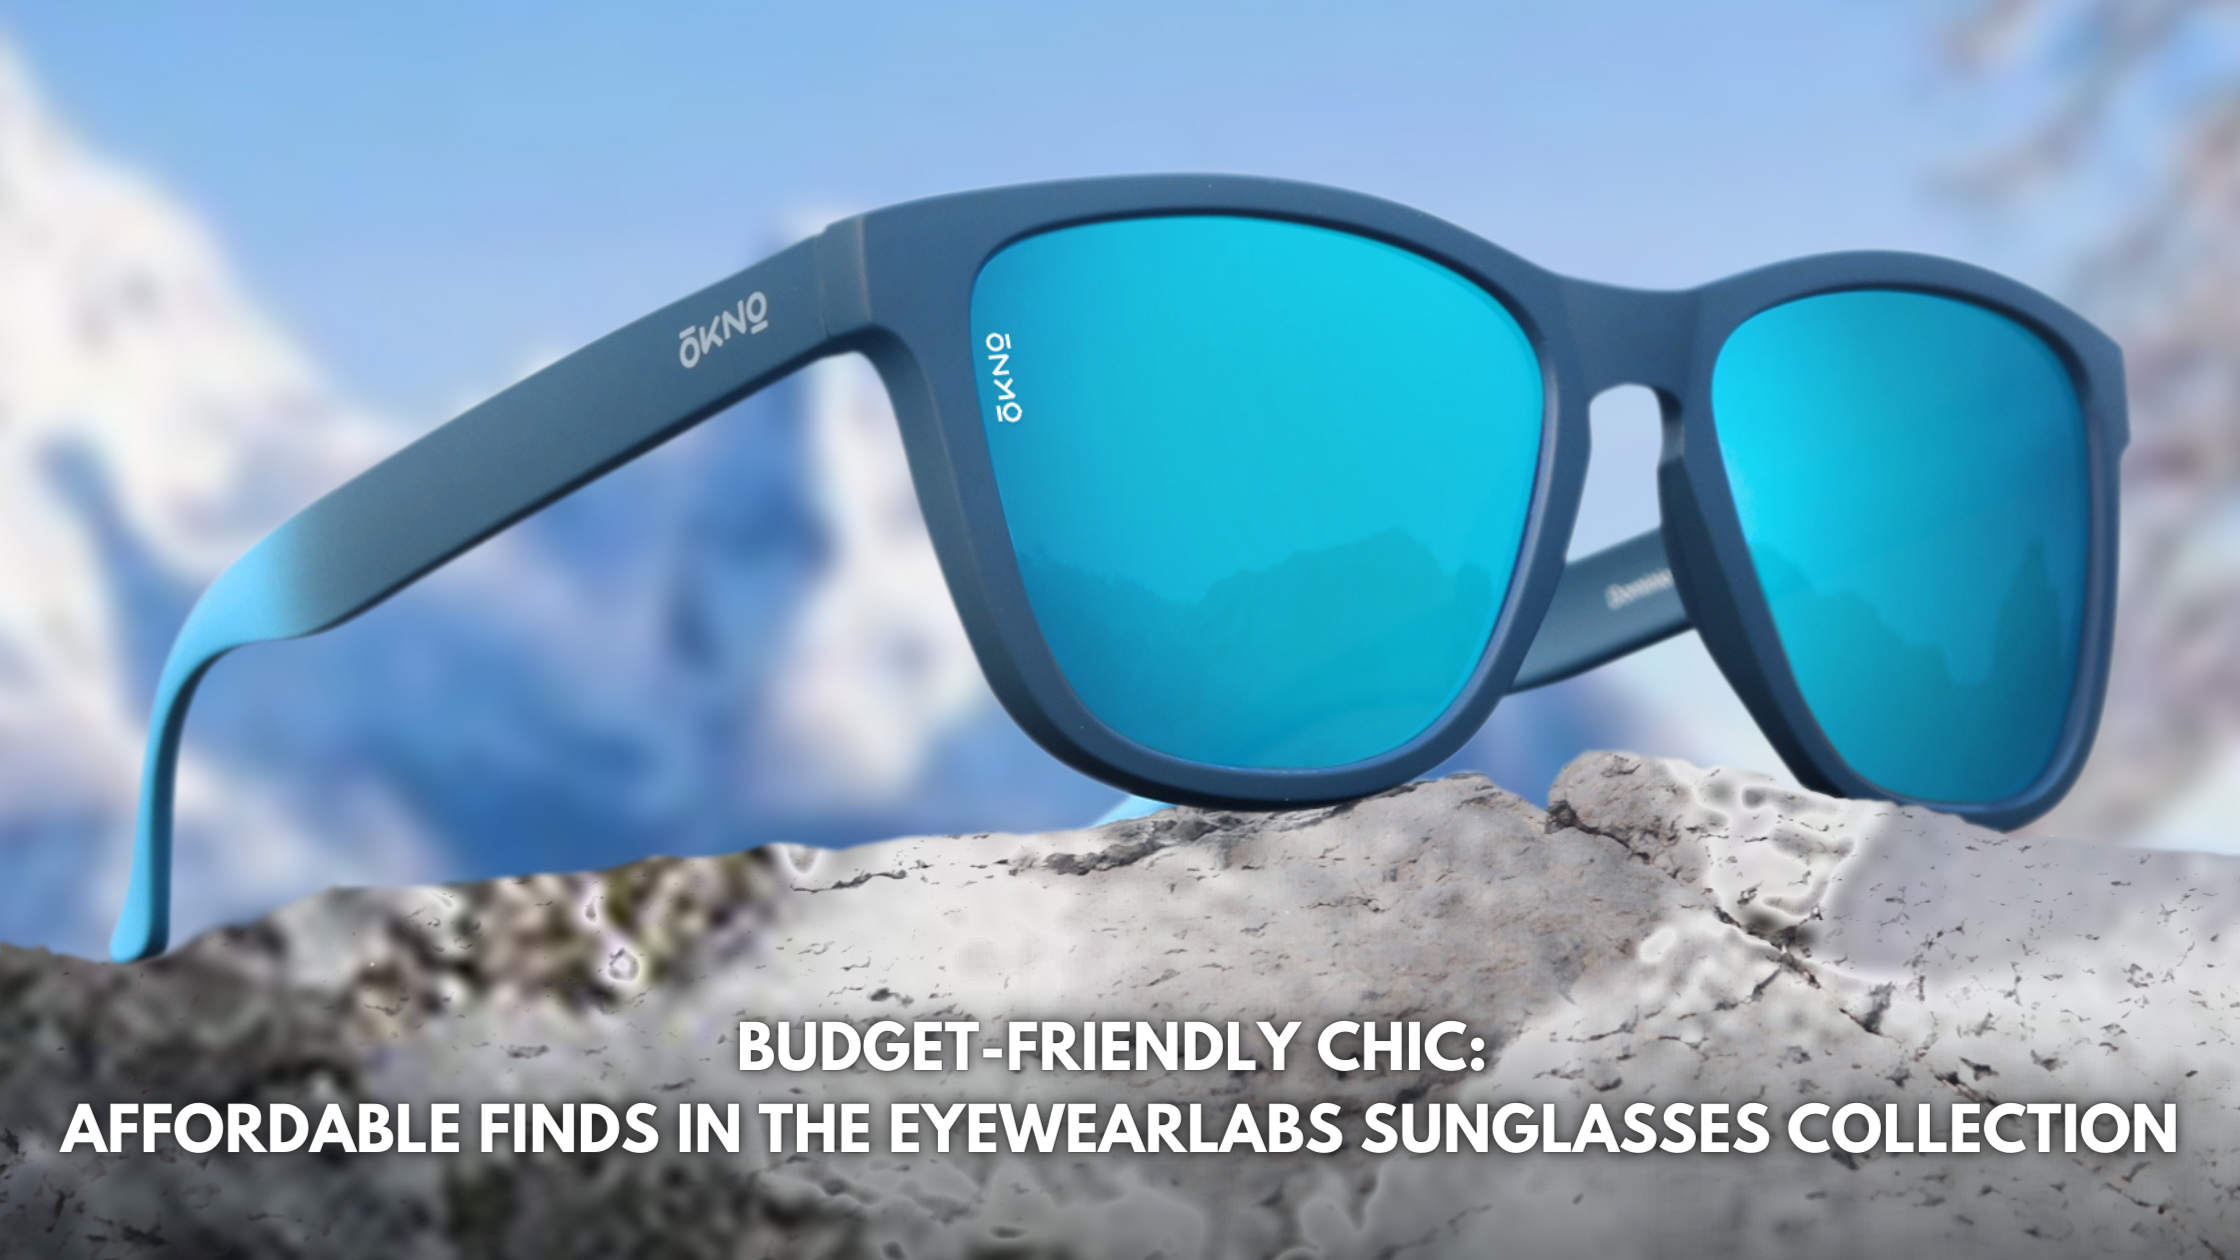 Budget-Friendly Chic: Affordable Finds in the Eyewearlabs Sunglasses Collection